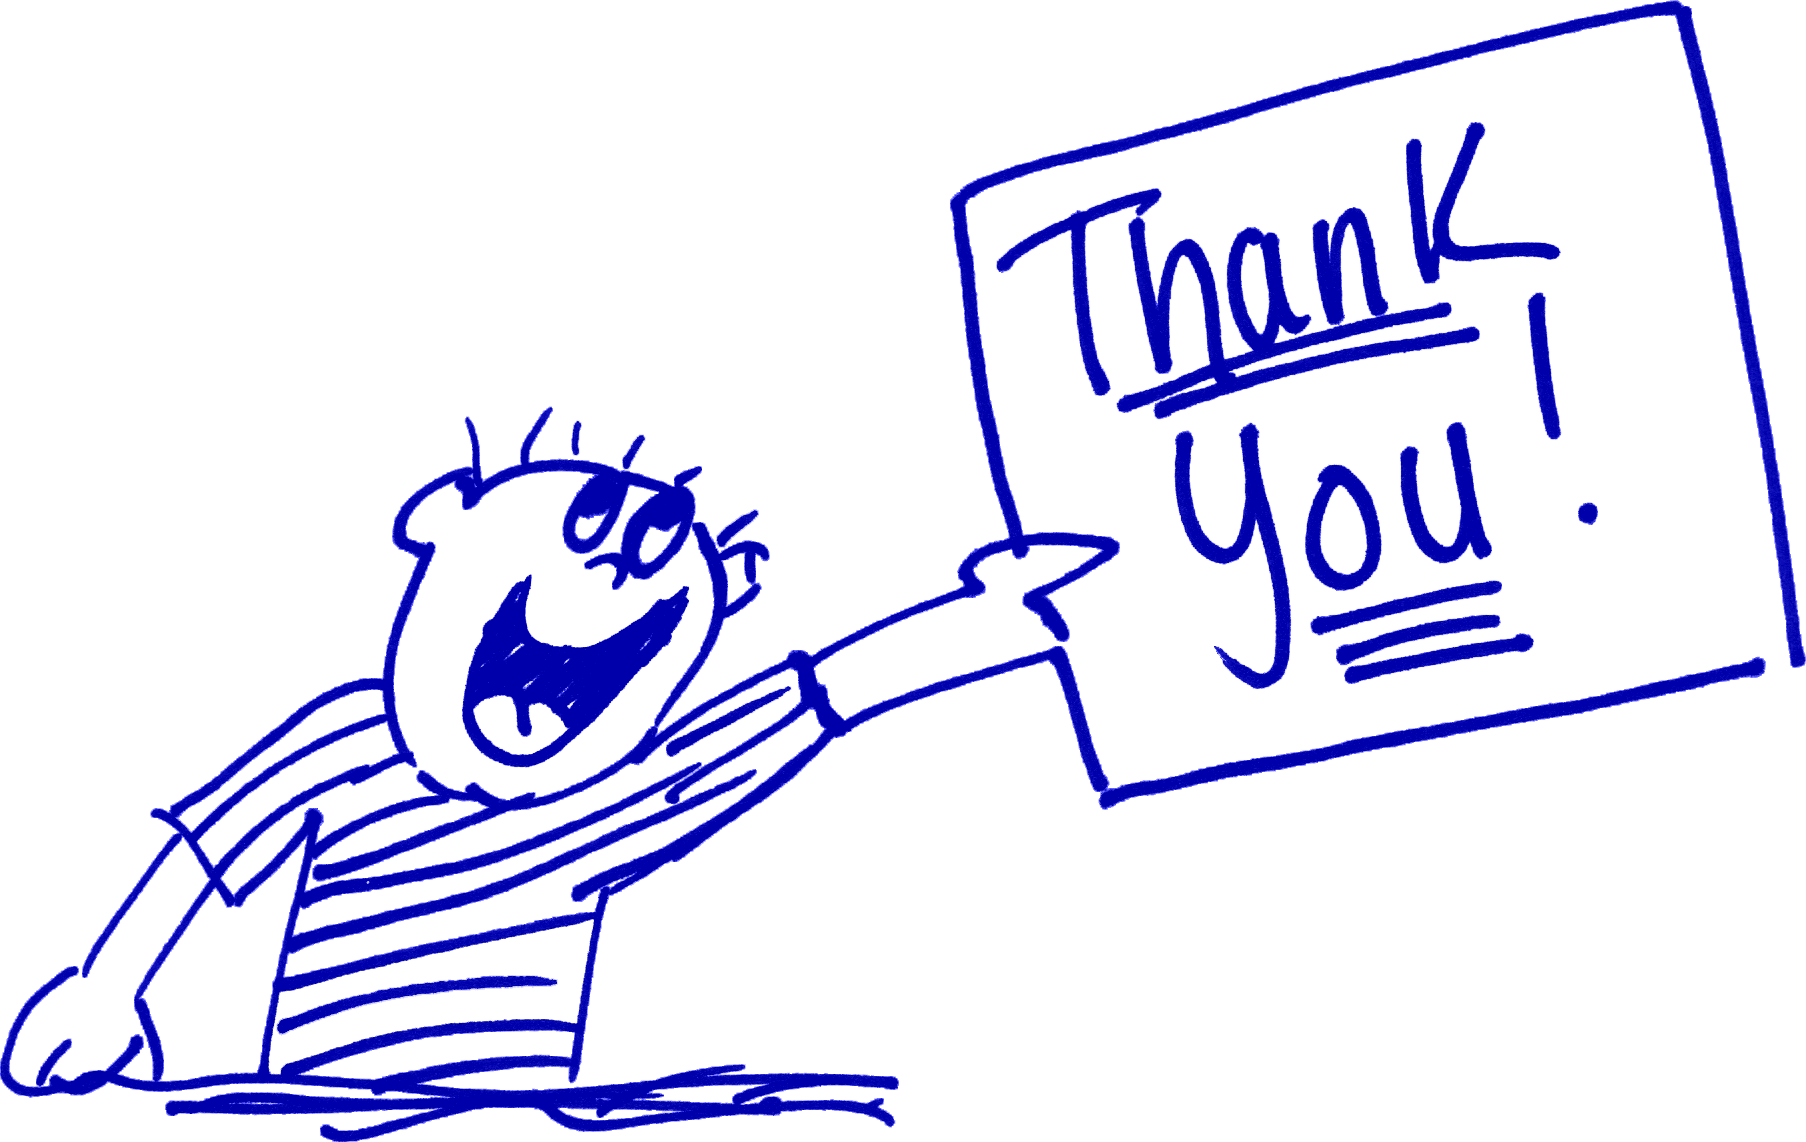 Thank You For Watching Animated   Clipart Panda   Free Clipart Images